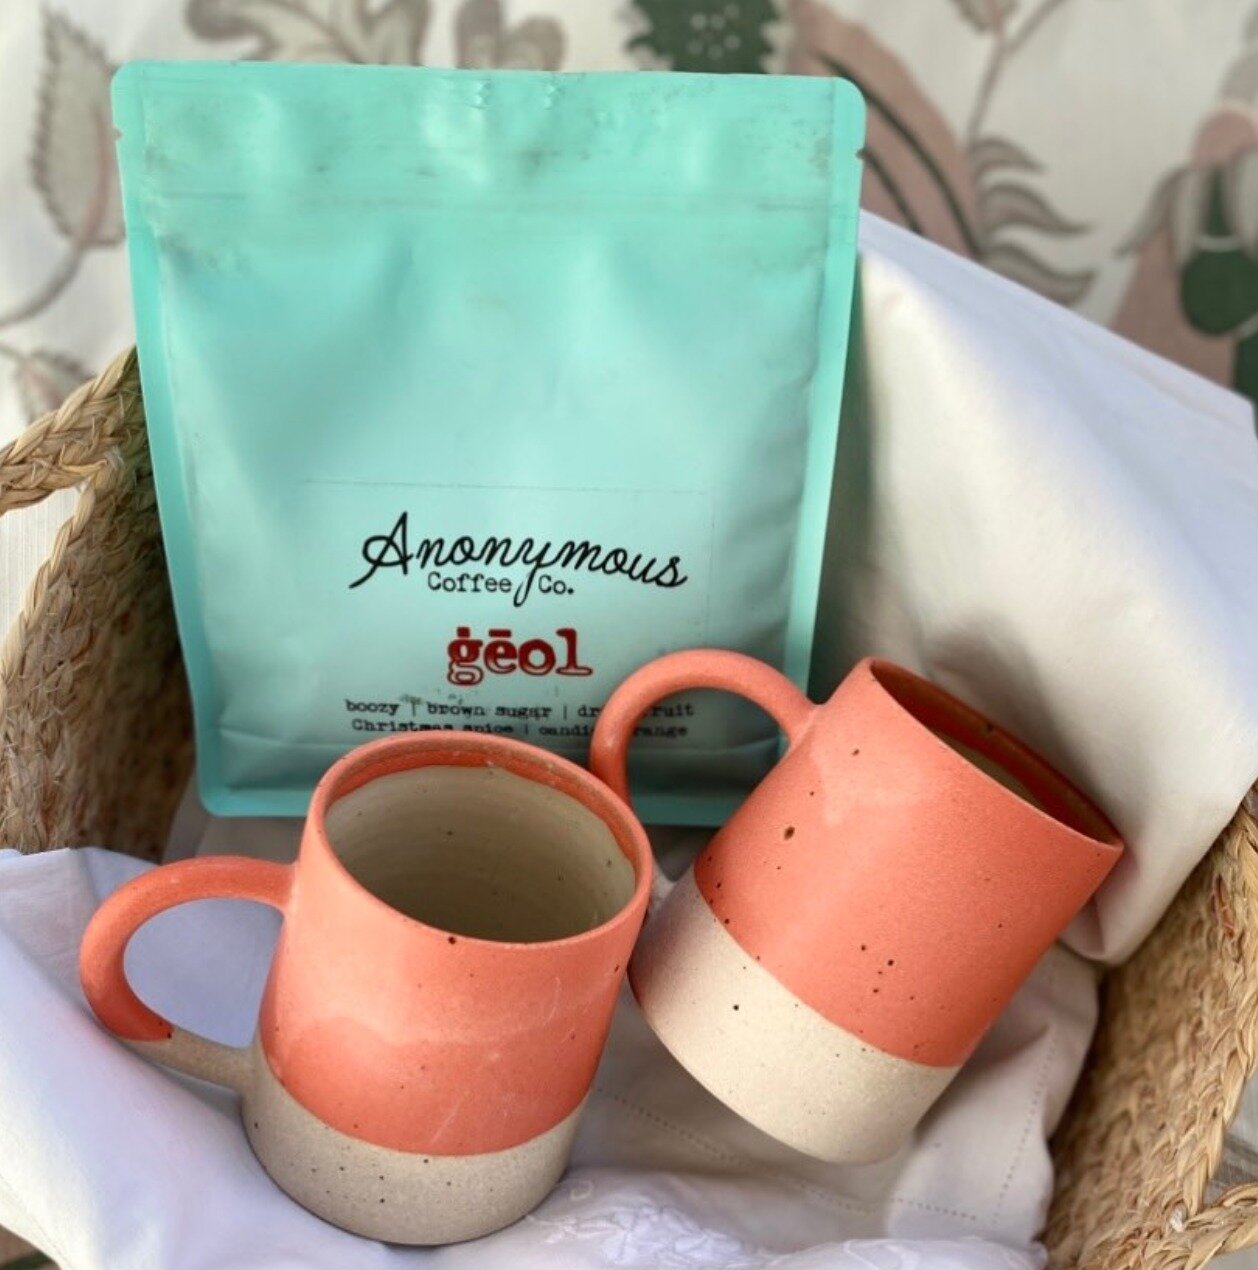 Hello February. It's time for a competition!!

We have teamed up with @jesssarsonpottery to bring you an opportunity to win two stoneware mugs and a bag of our delicious ground geol coffee.

To enter:
1. Follow @anonymouscoffeeco and @jesssarsonpotte